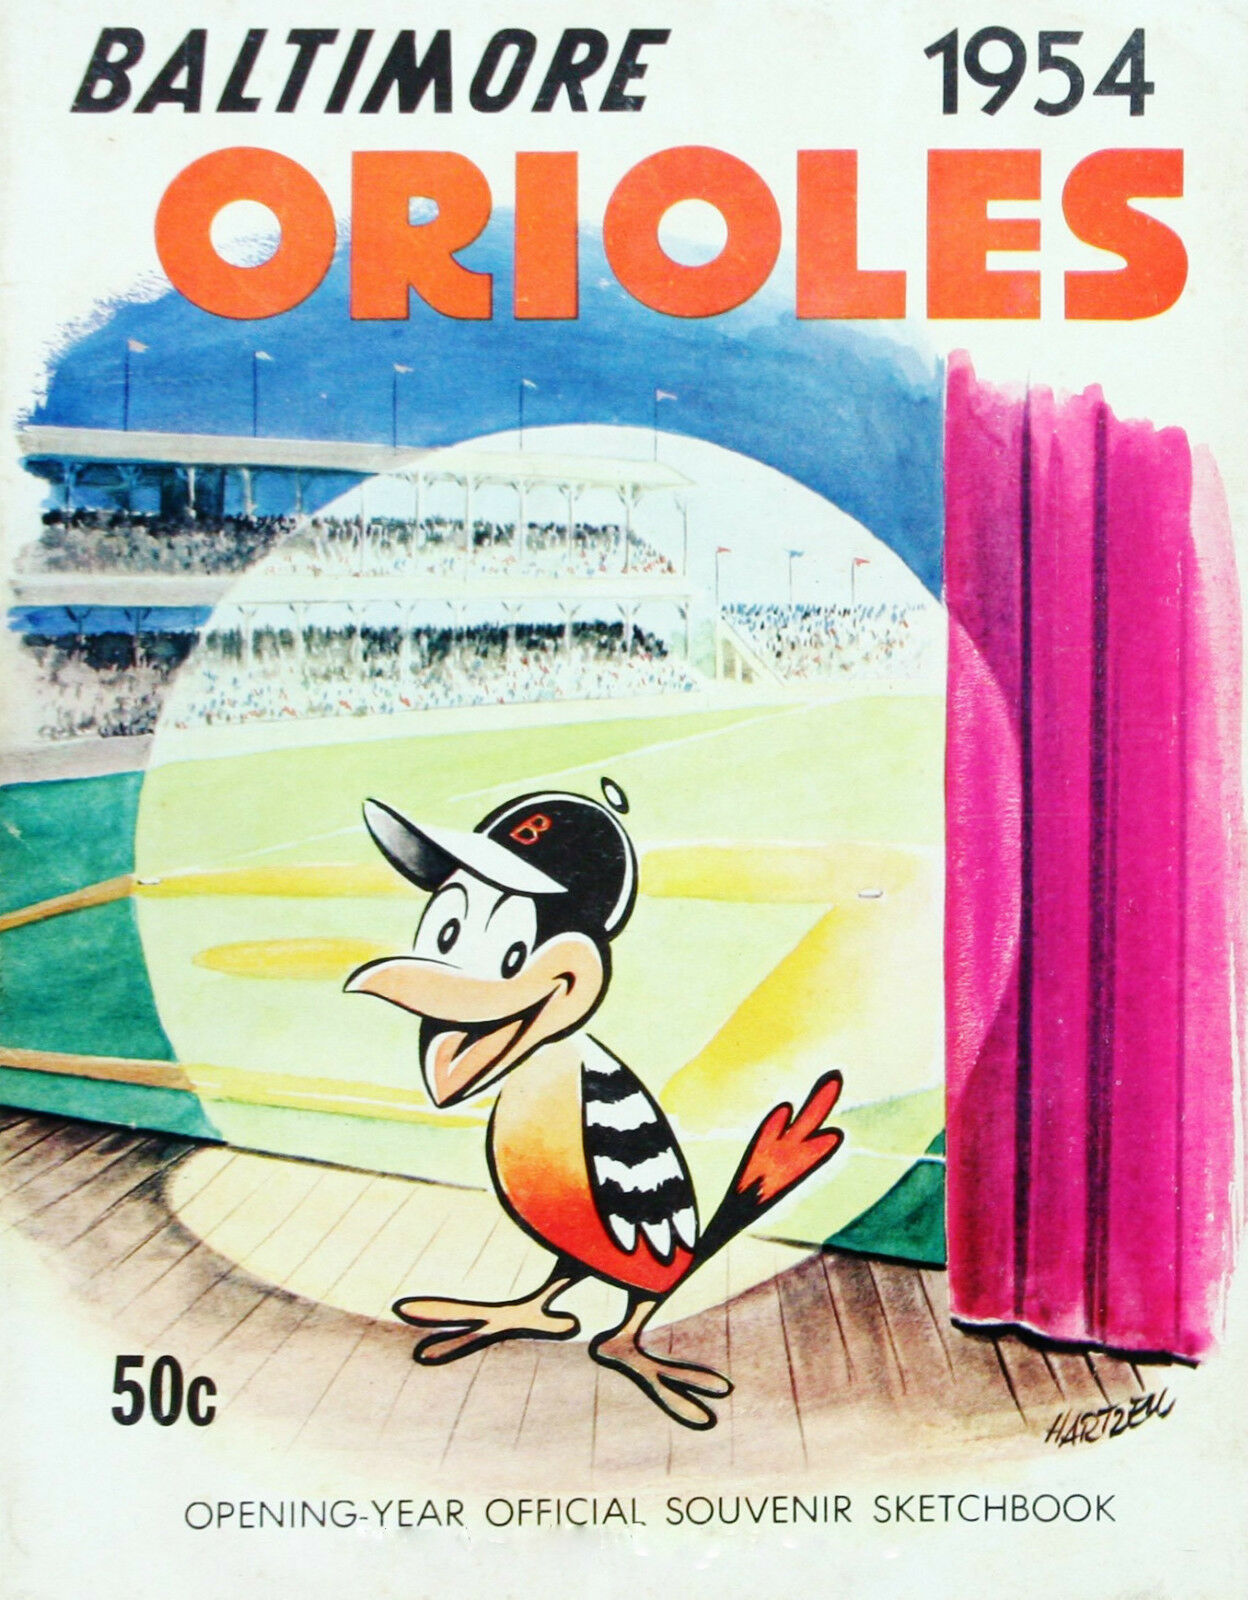 1954 BALTIMORE ORIOLES FIRST YEAR OFFICIAL PROGRAM PHOTO Glossy 8x10